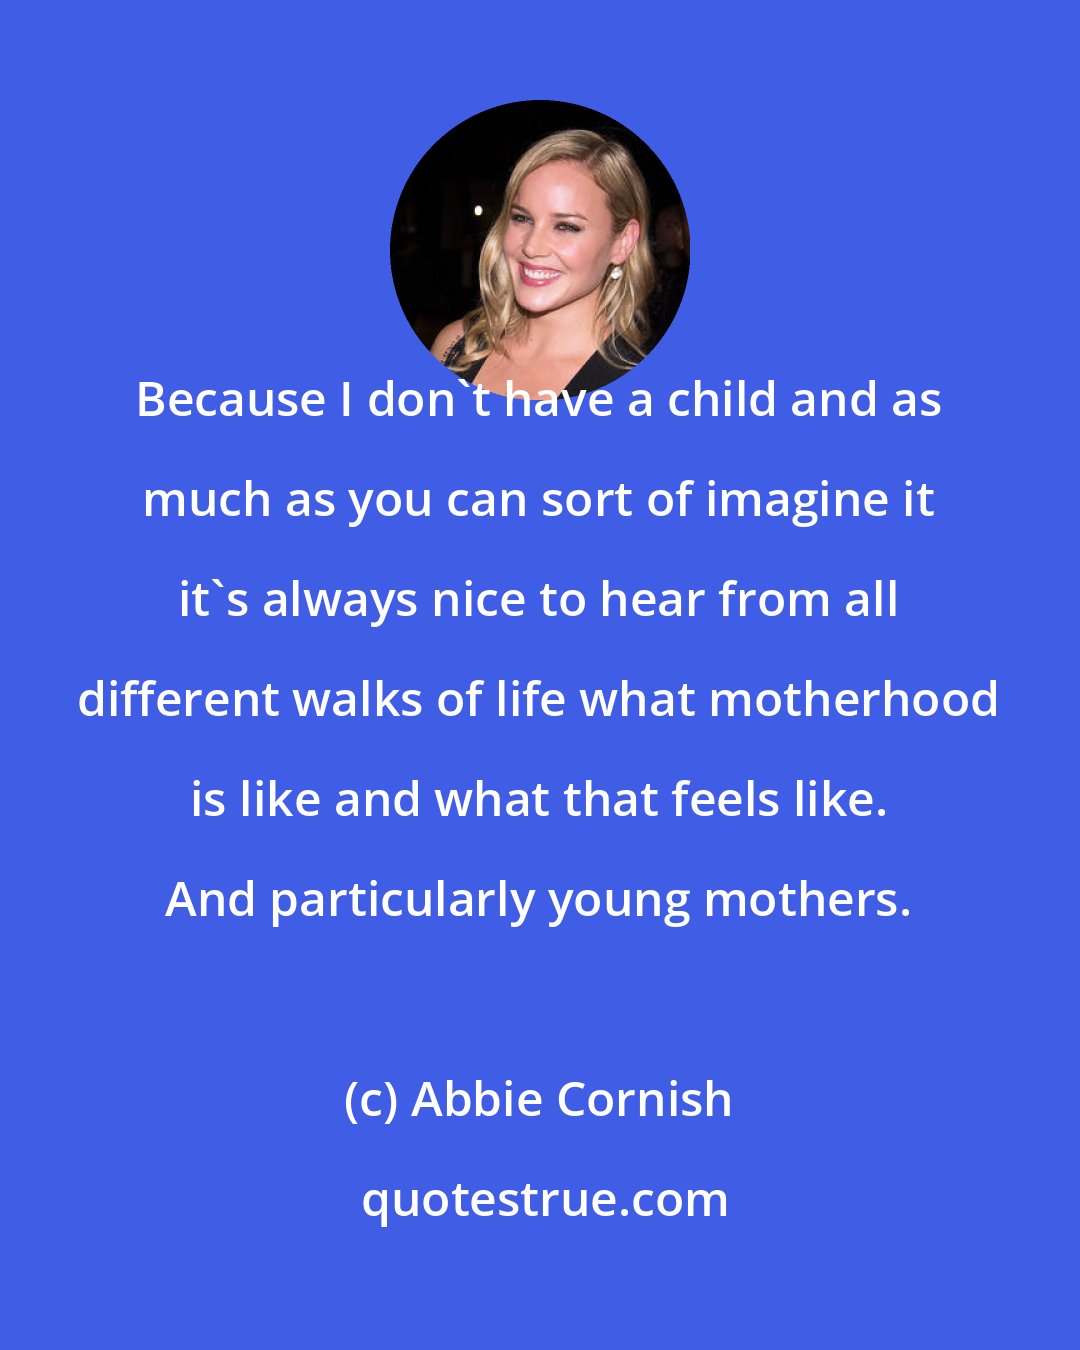 Abbie Cornish: Because I don't have a child and as much as you can sort of imagine it it's always nice to hear from all different walks of life what motherhood is like and what that feels like. And particularly young mothers.